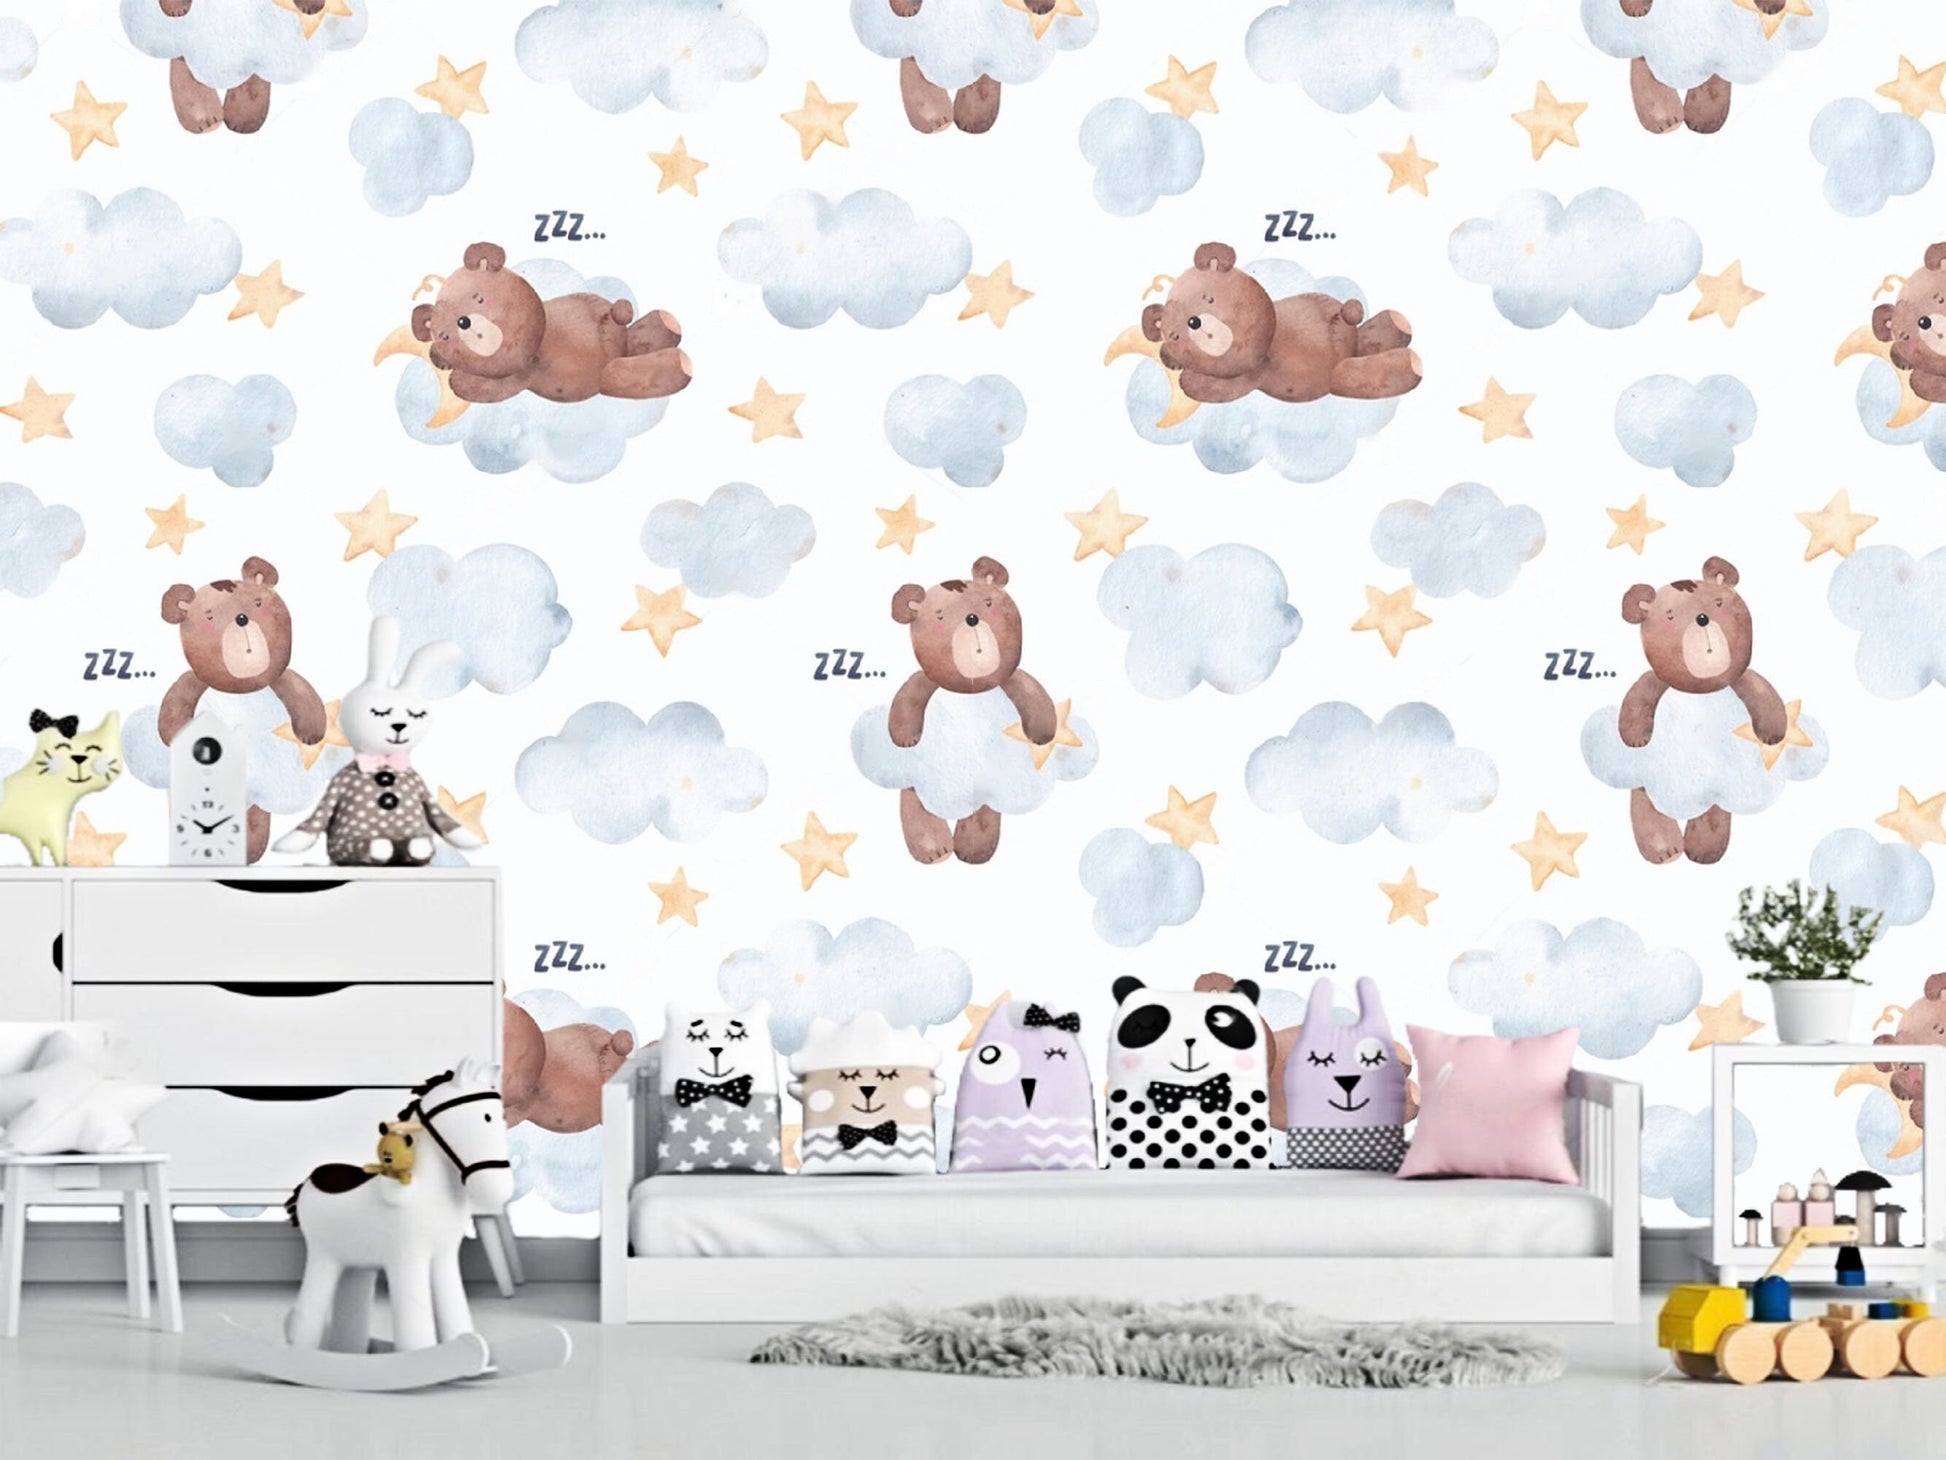 Whimsical teddy bear wall decor in a baby's room, adding a touch of joy and comfort.